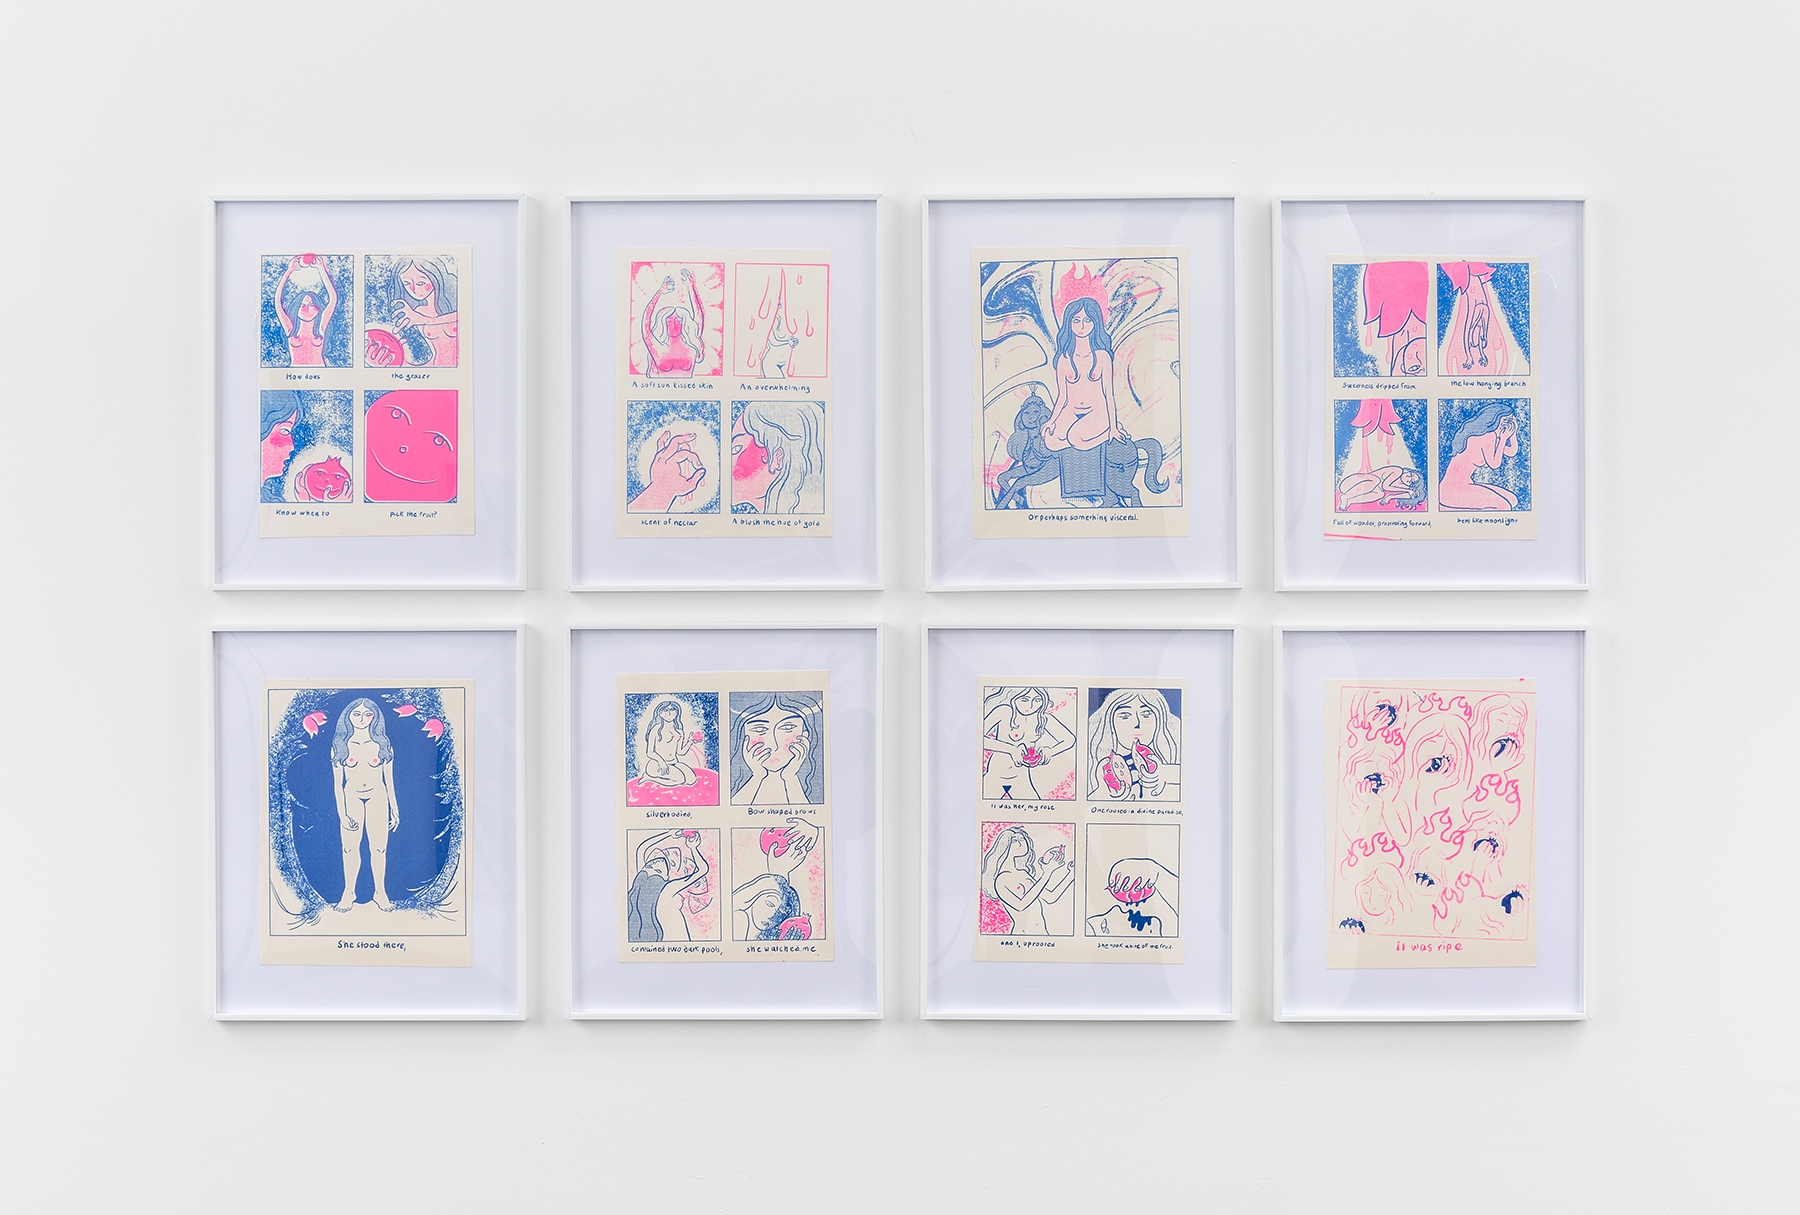  Installation view of رسیده / Ripe (2019), silkscreen, digital excerpts from an eight-page comic, 11" x 15" each, from the group exhibition Or High Water at Safe Gallery, Brooklyn, NY 